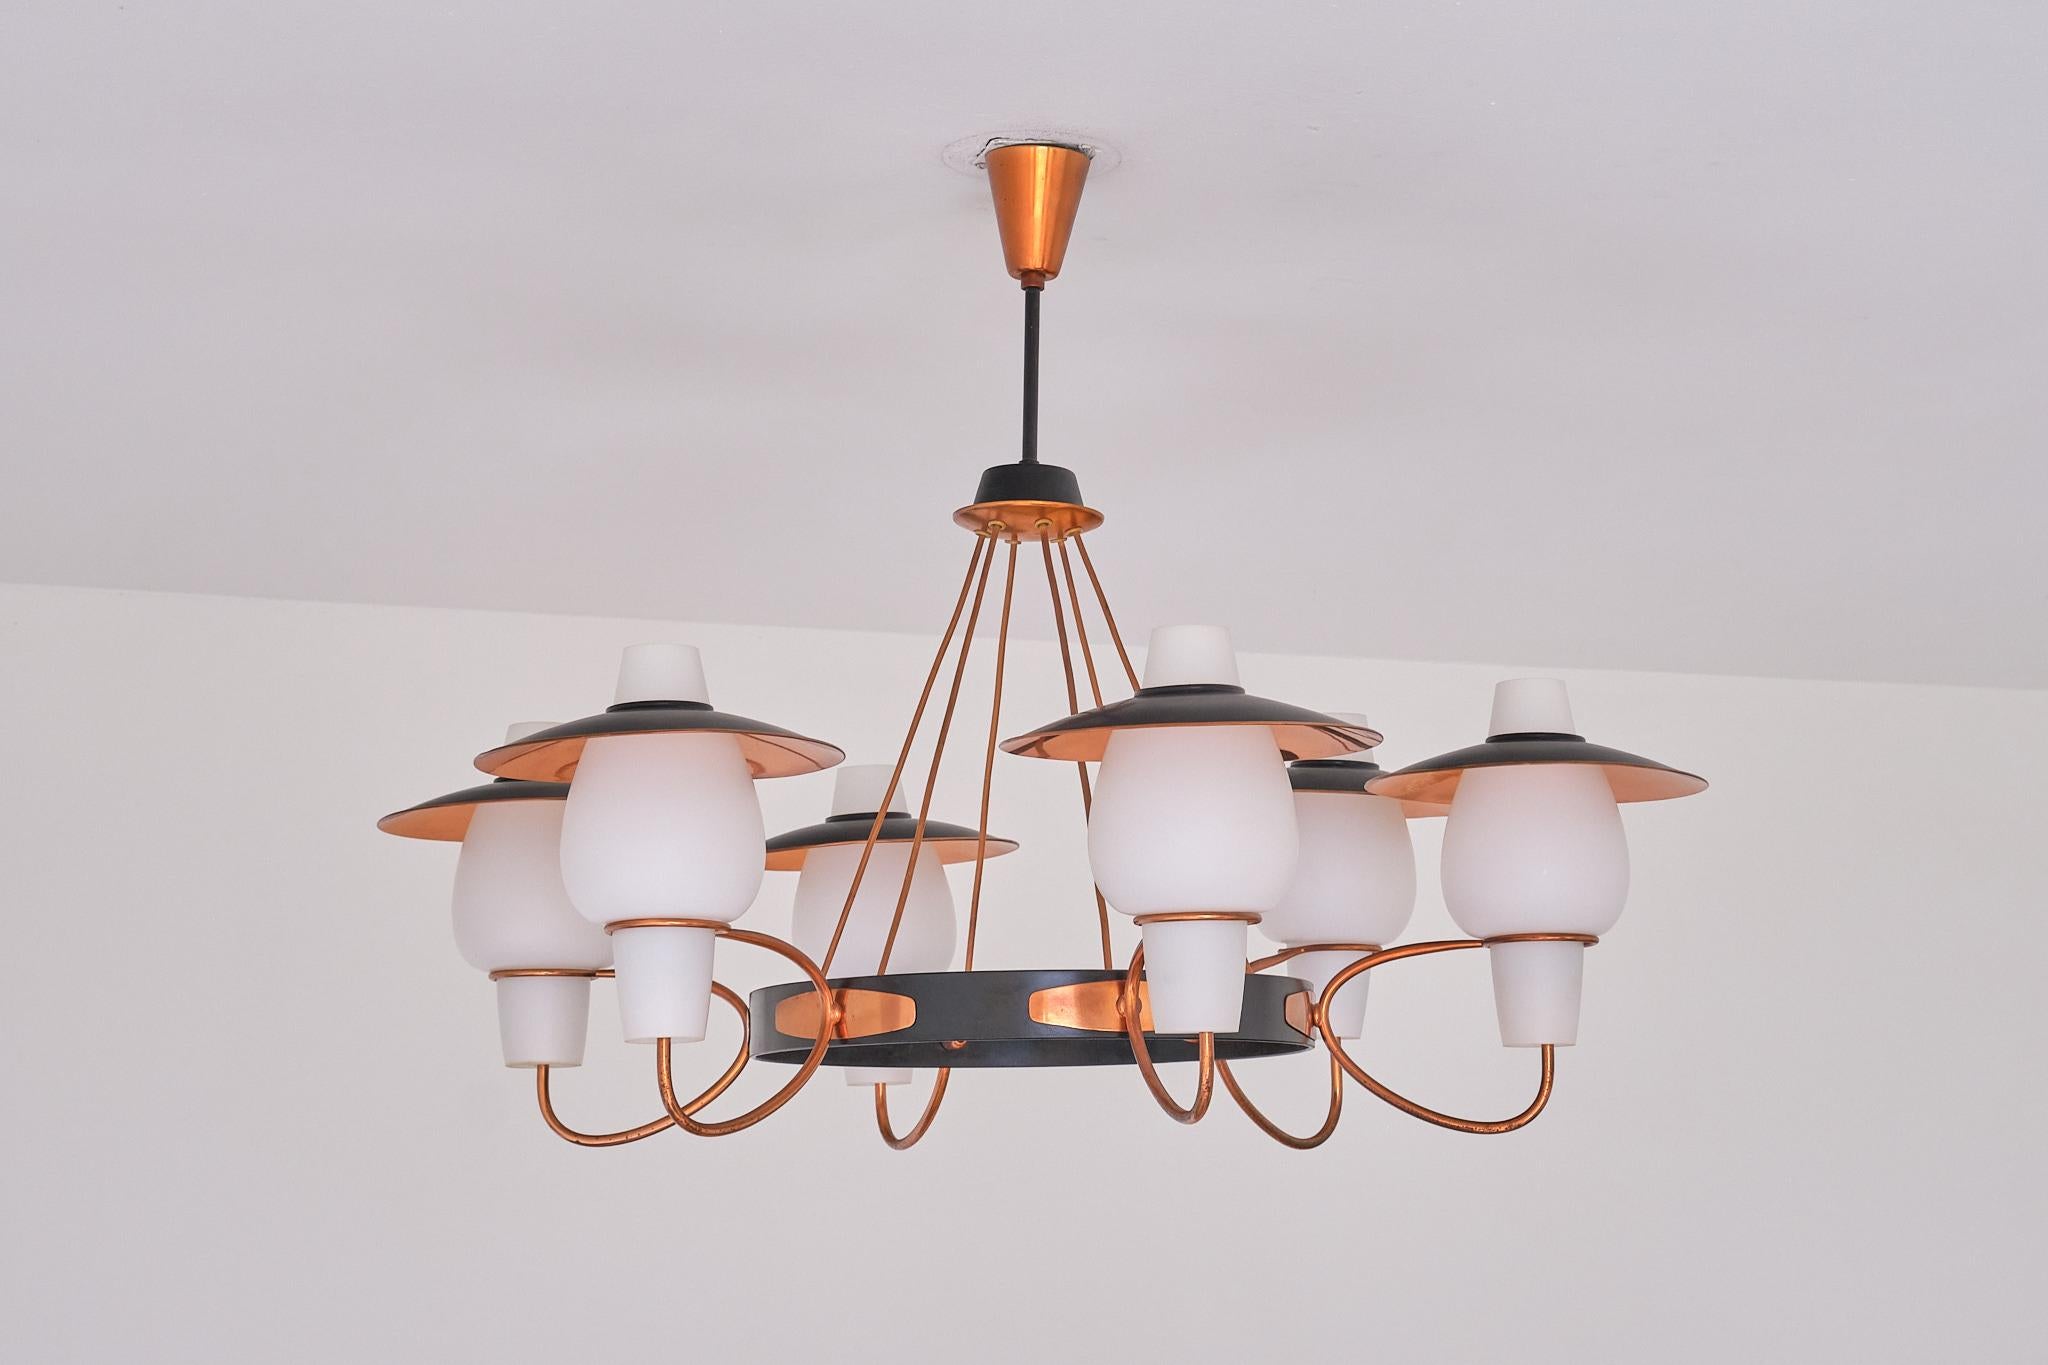 This striking six arm chandelier was produced in Denmark in the 1960s.

The fixture consists of six white opal glass shades, each with a separate reflective shade in copper mounted on top of the glass shade. This created a beautiful effect when